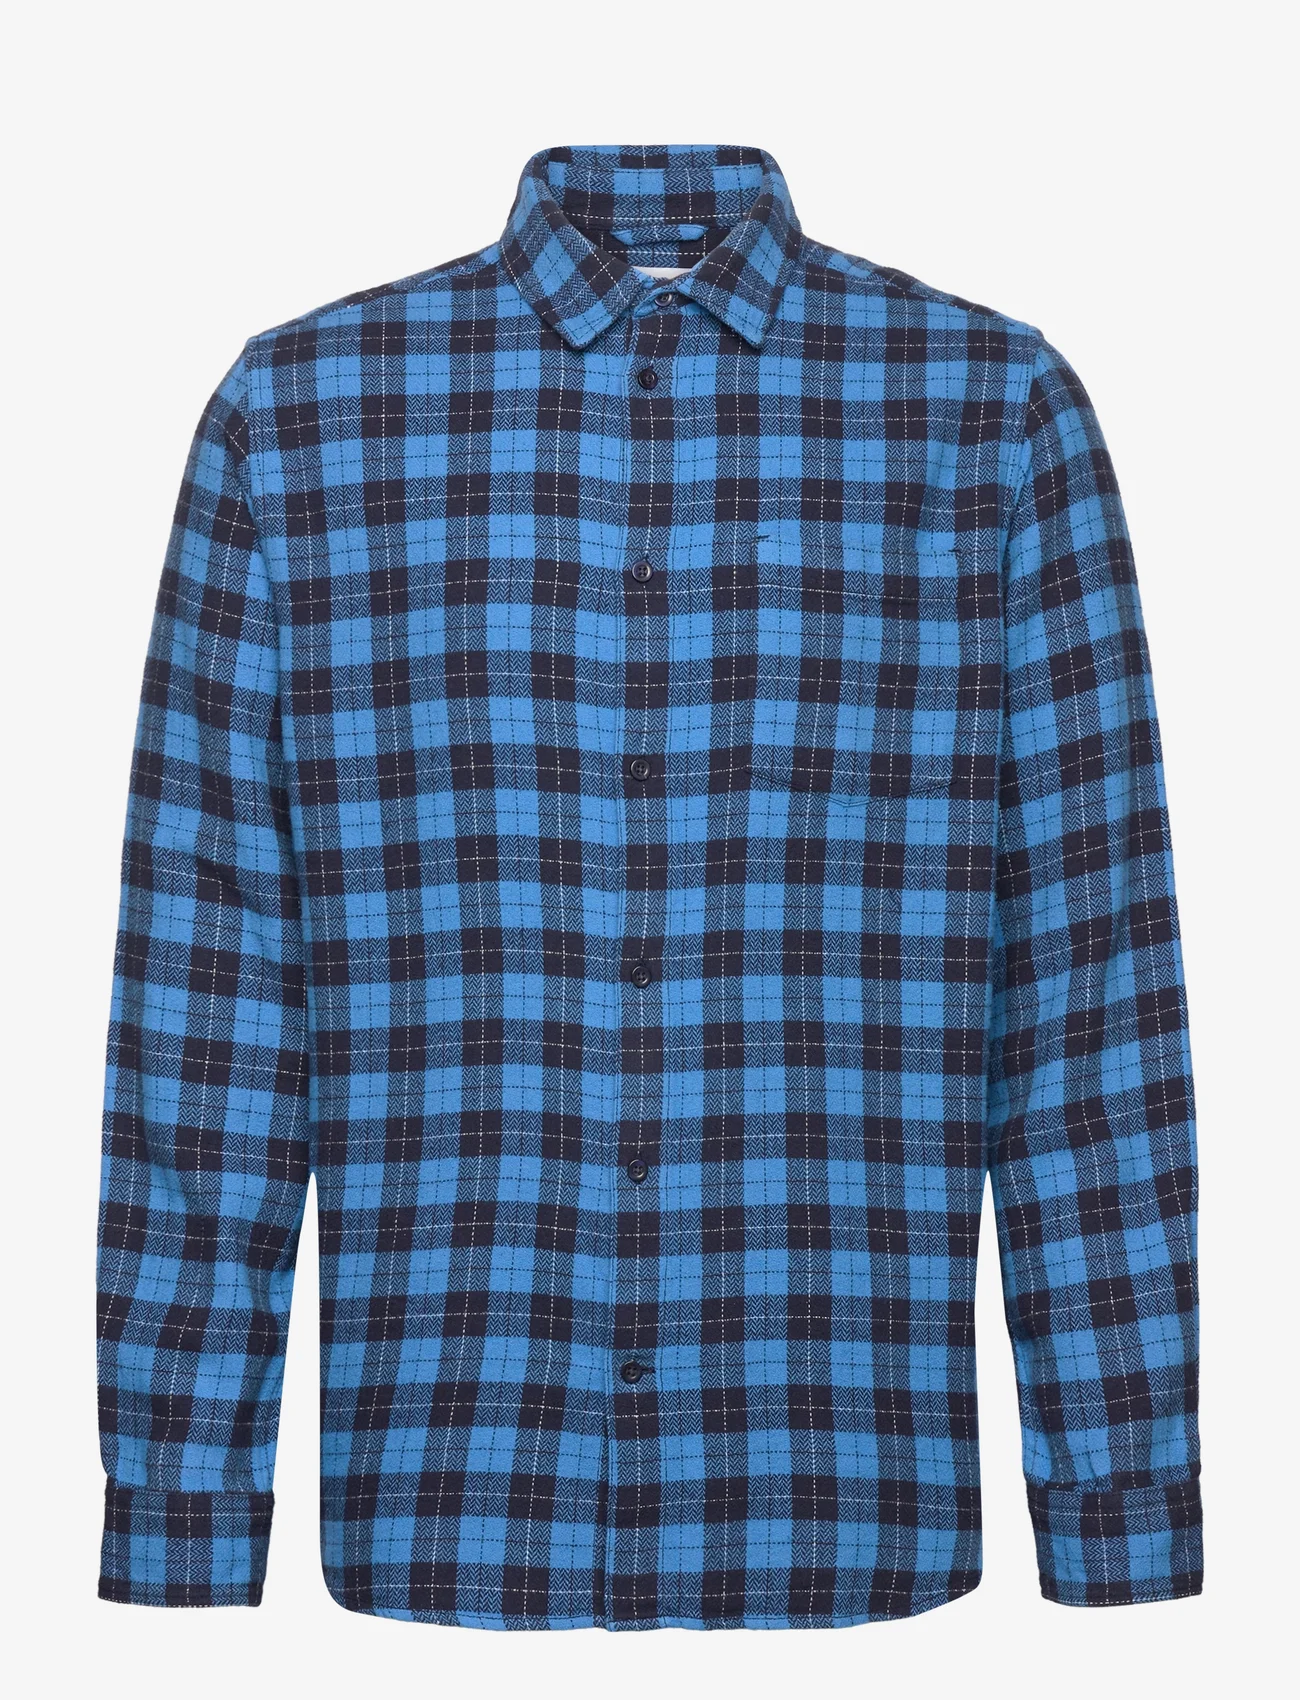 Knowledge Cotton Apparel - Loose fit checkered shirt - GOTS/Ve - casual shirts - blue check - 0